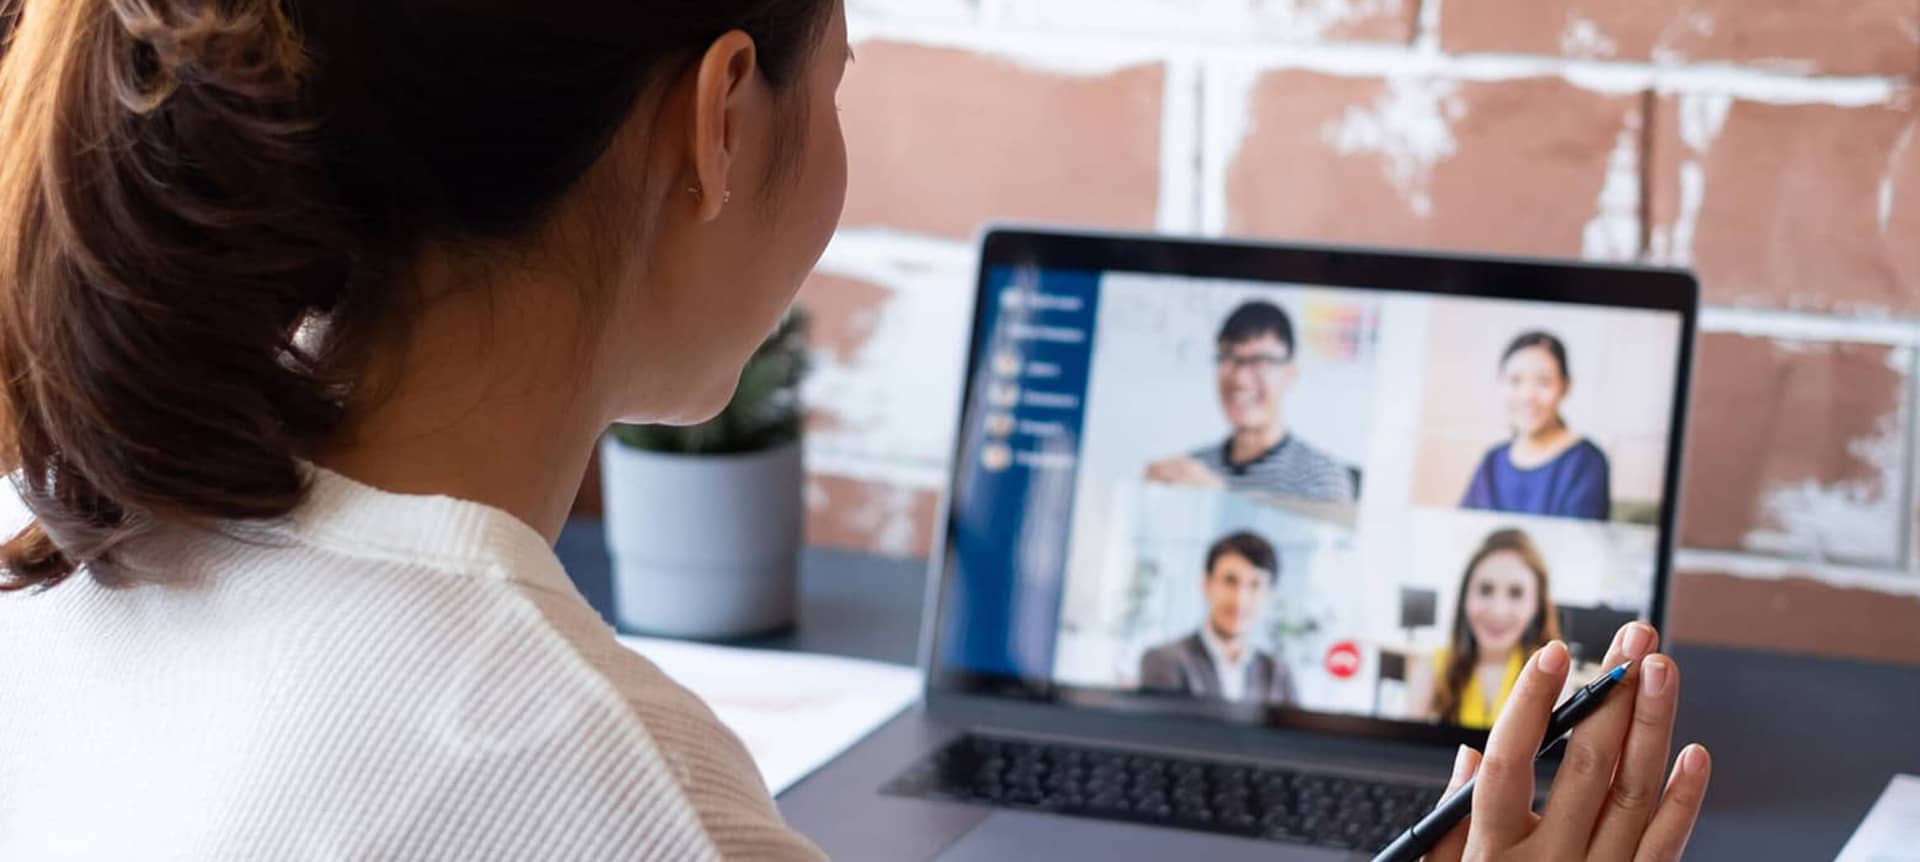 How to Effectively Use Video Interviewing Software in HR